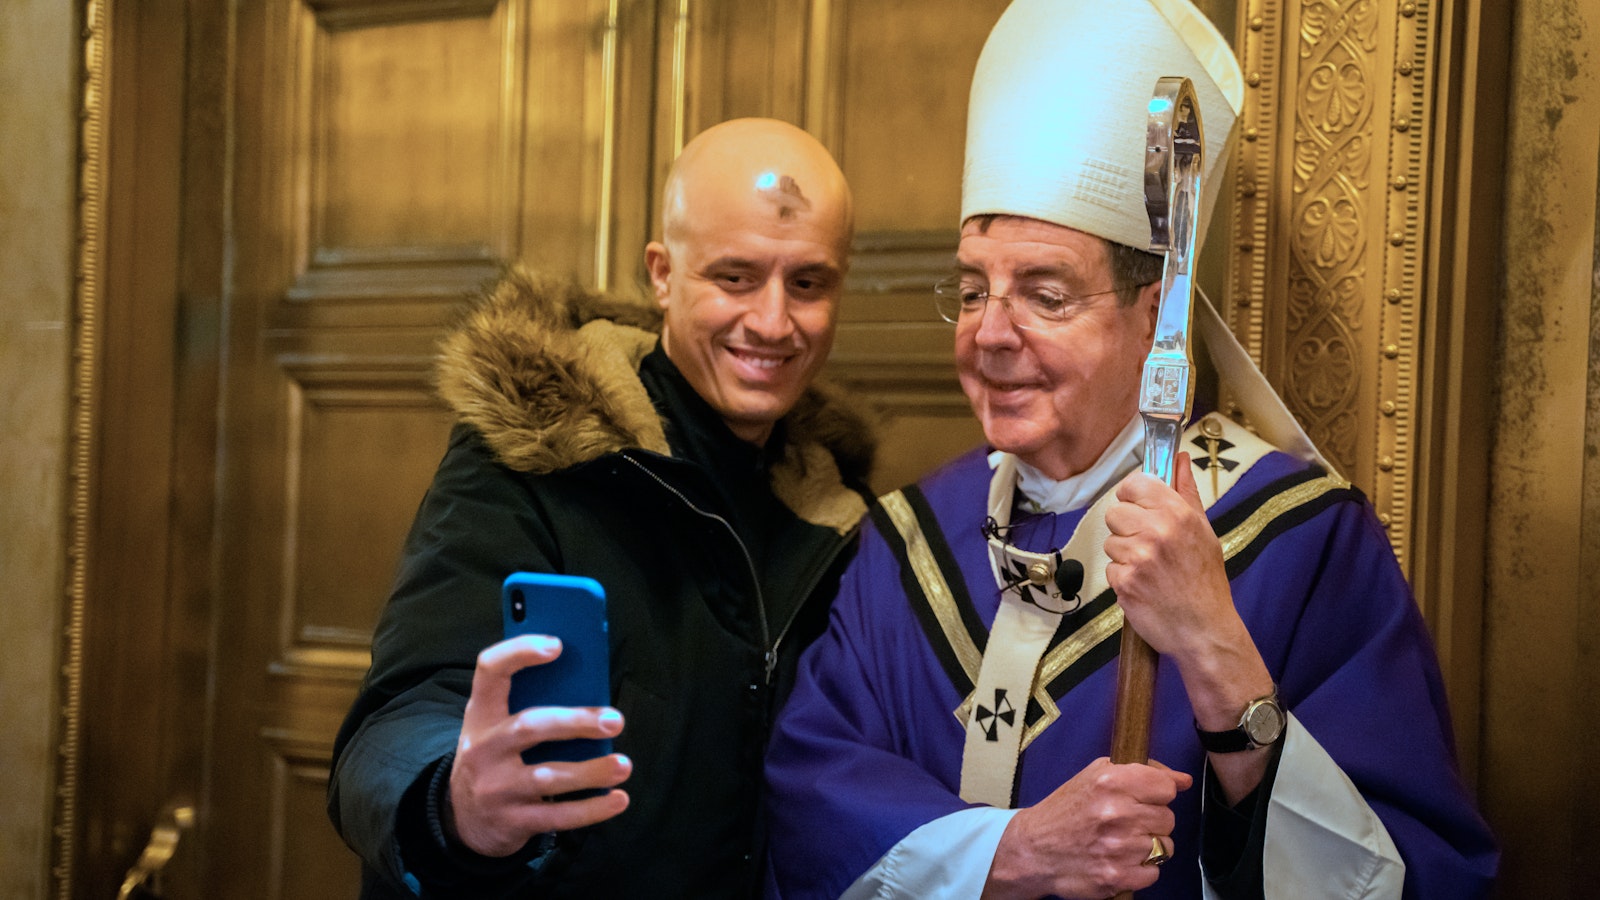 A Massgoer snaps a selfie with Archbishop Vigneron after Ash Wednesday Mass on Feb. 27, 2020, at St. Aloysius Parish in downtown Detroit. (Valaurian Waller | Detroit Catholic)